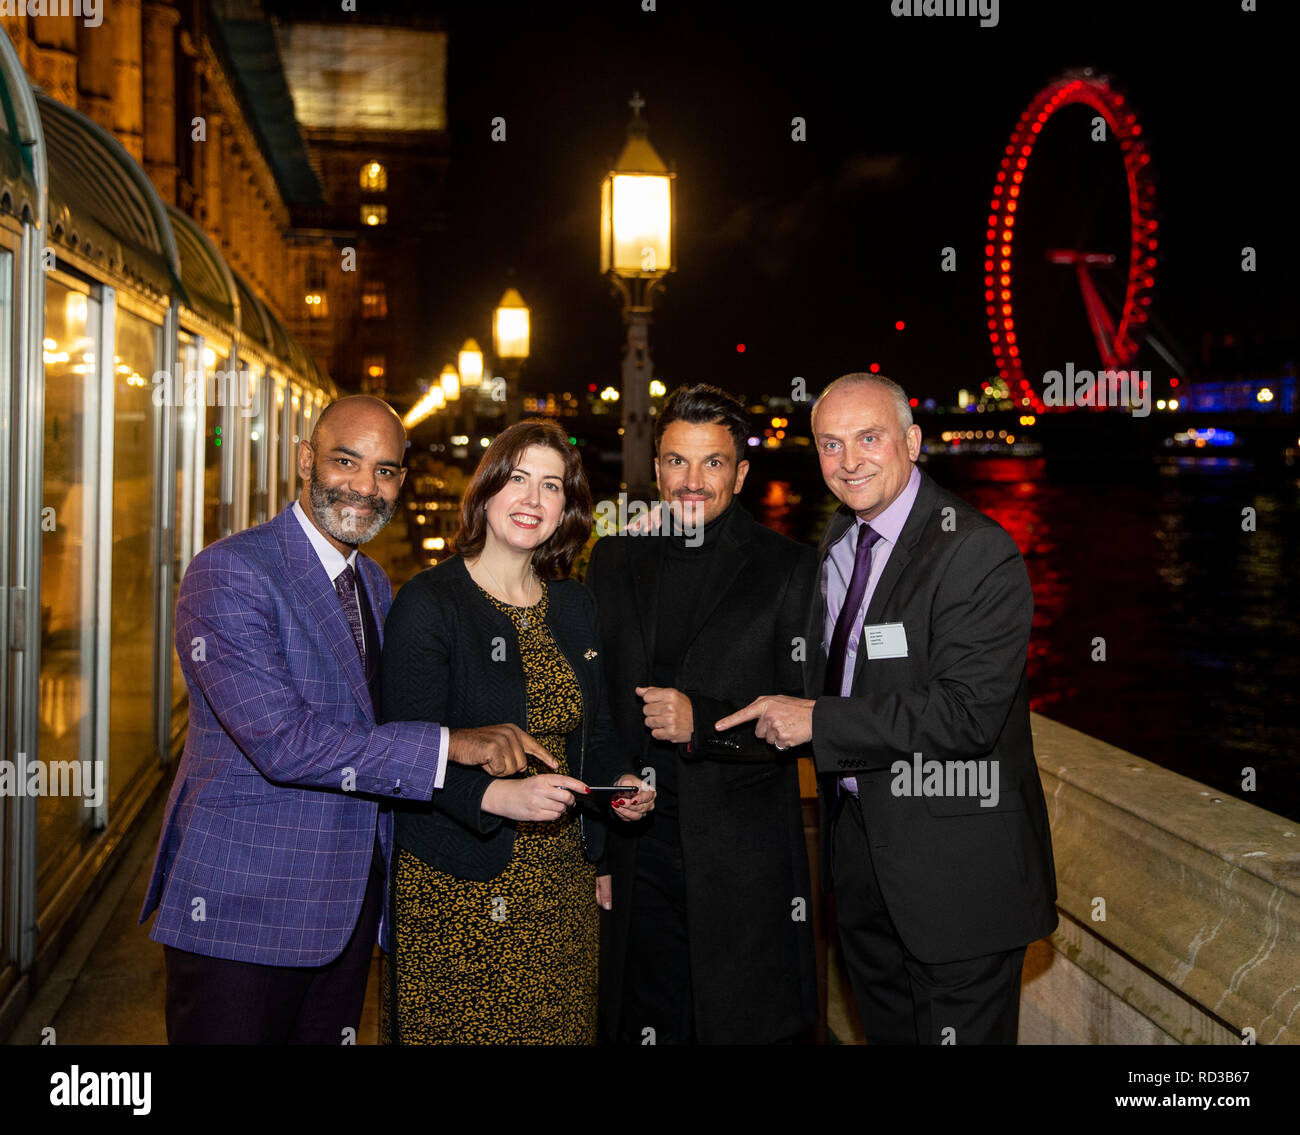 (From left to right) Paul Thompson, Founder of Water Babies, Lucy Powell MP, Central Manchester Constituency, Peter Andre and Steve Franks CEO of Water Babies outside the House of Commons at the launch of the Children First campaign in conjunction with Water Babies. Stock Photo